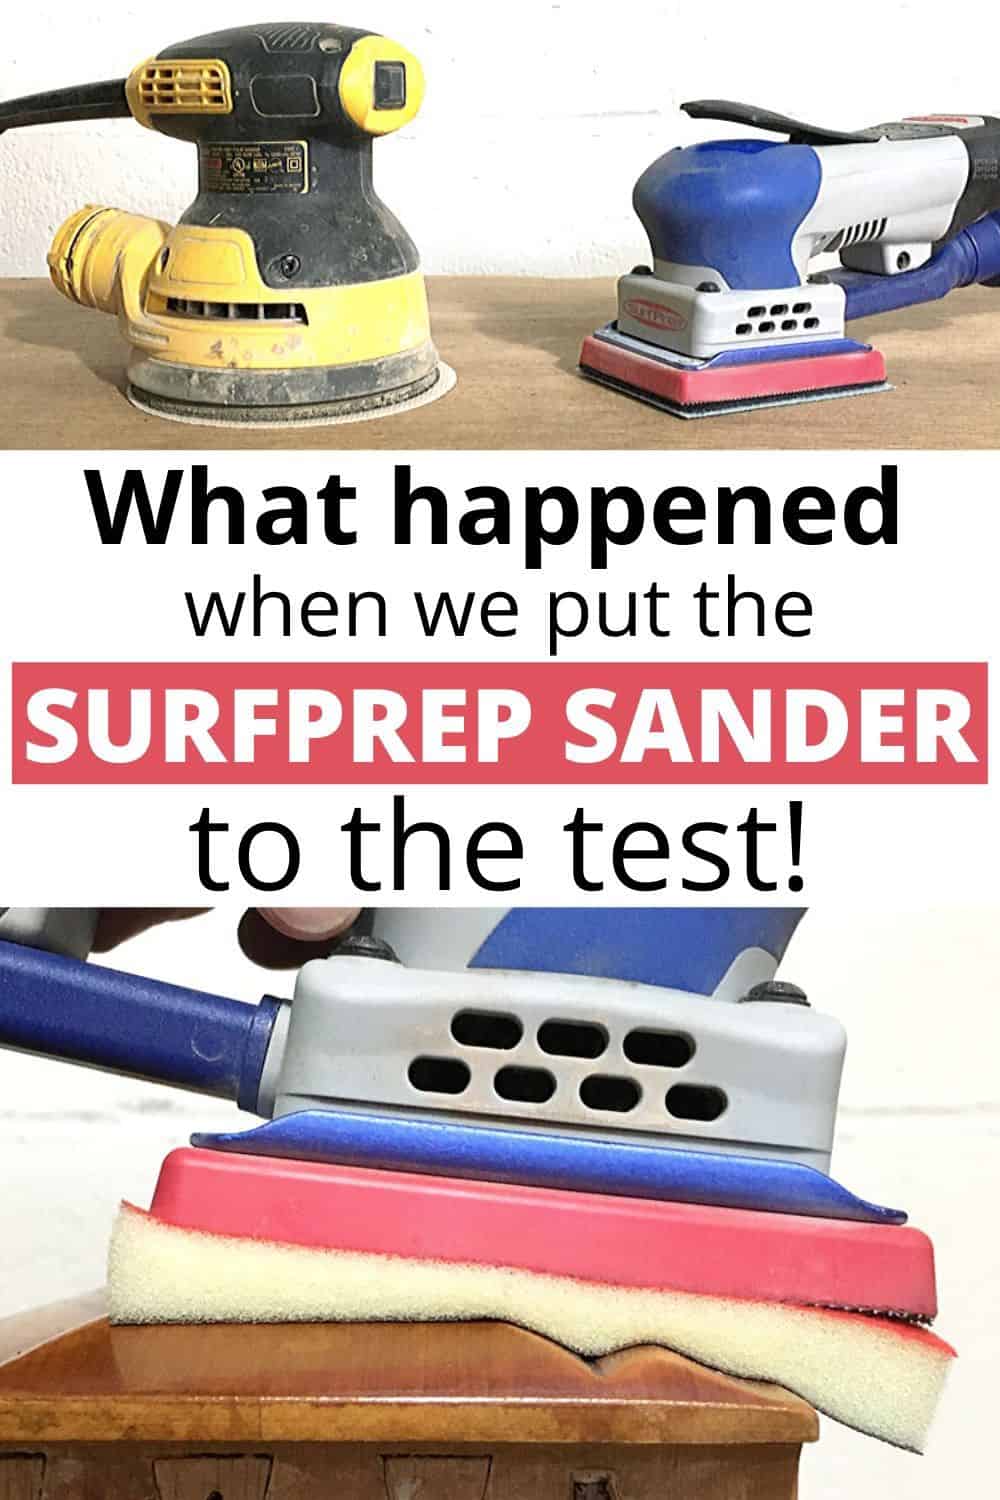 SurfPrep Sander – What happened when we put it to the test?